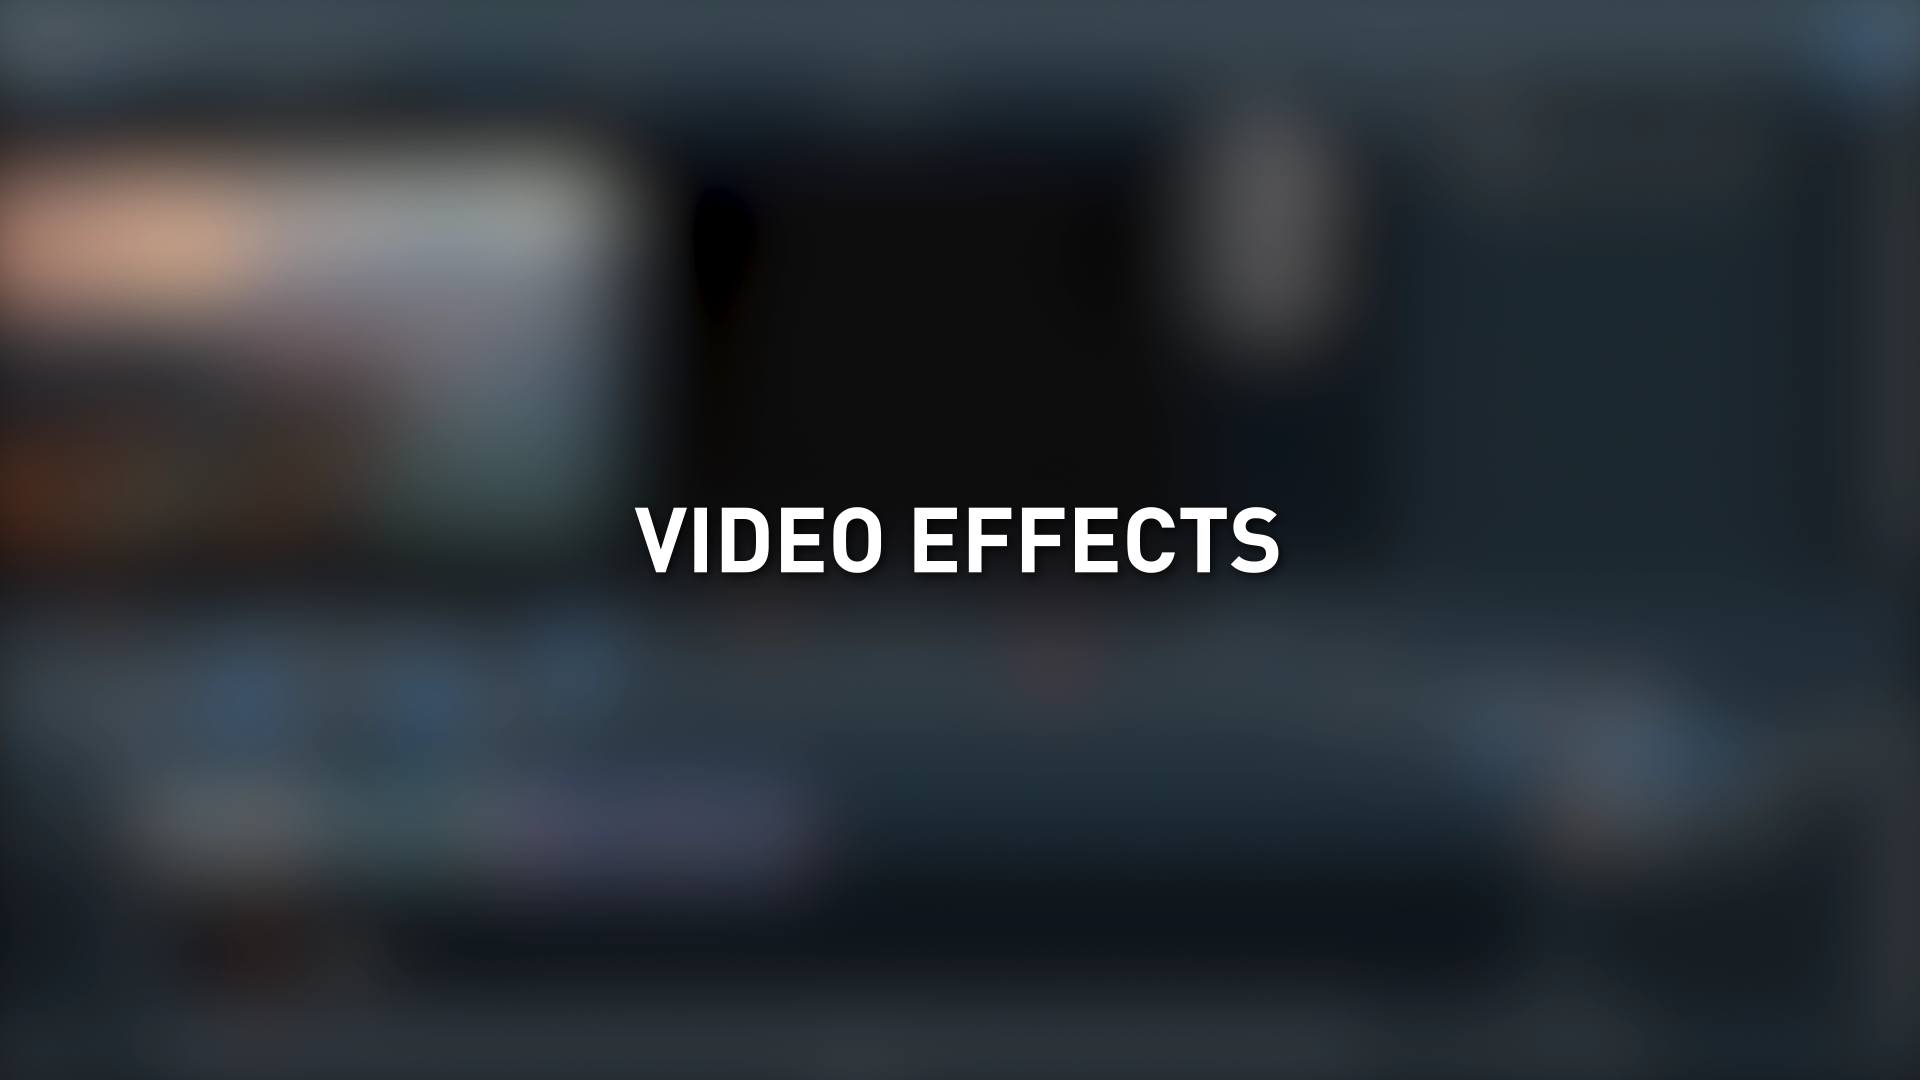 Video effects